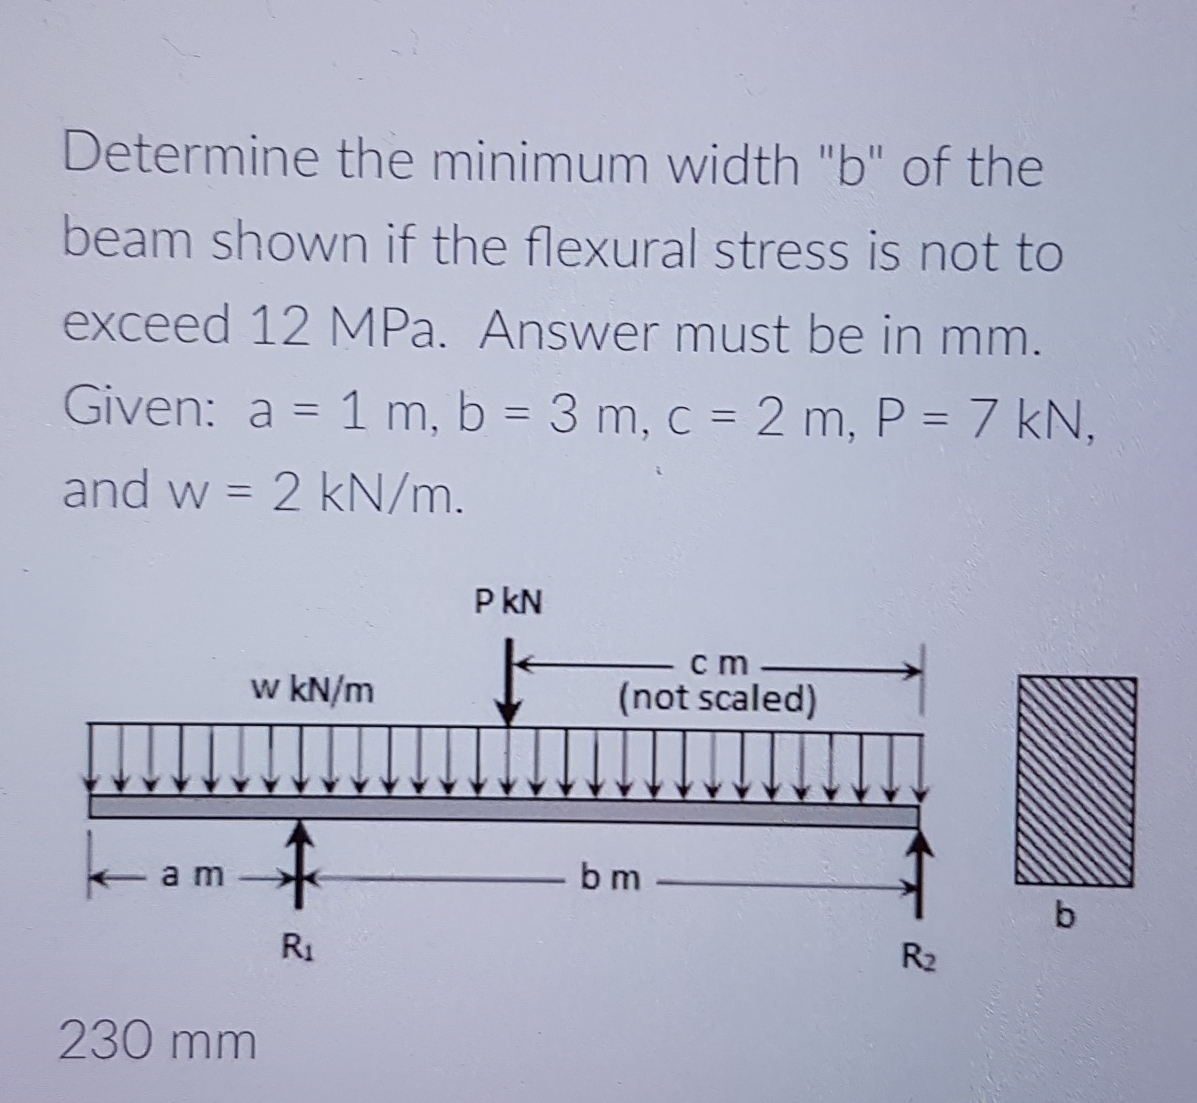 Determine the minimum width "b" of the
beam shown if the flexural stress is not to
exceed 12 MPa. Answer must be in mm.
Given: a = 1 m, b = 3 m, c = 2 m, P = 7 kN,
%3D
%3D
%3D
and w = 2 kN/m.
P kN
c m
w kN/m
(not scaled)
ka
bm
b
R1
R2
230 mm
